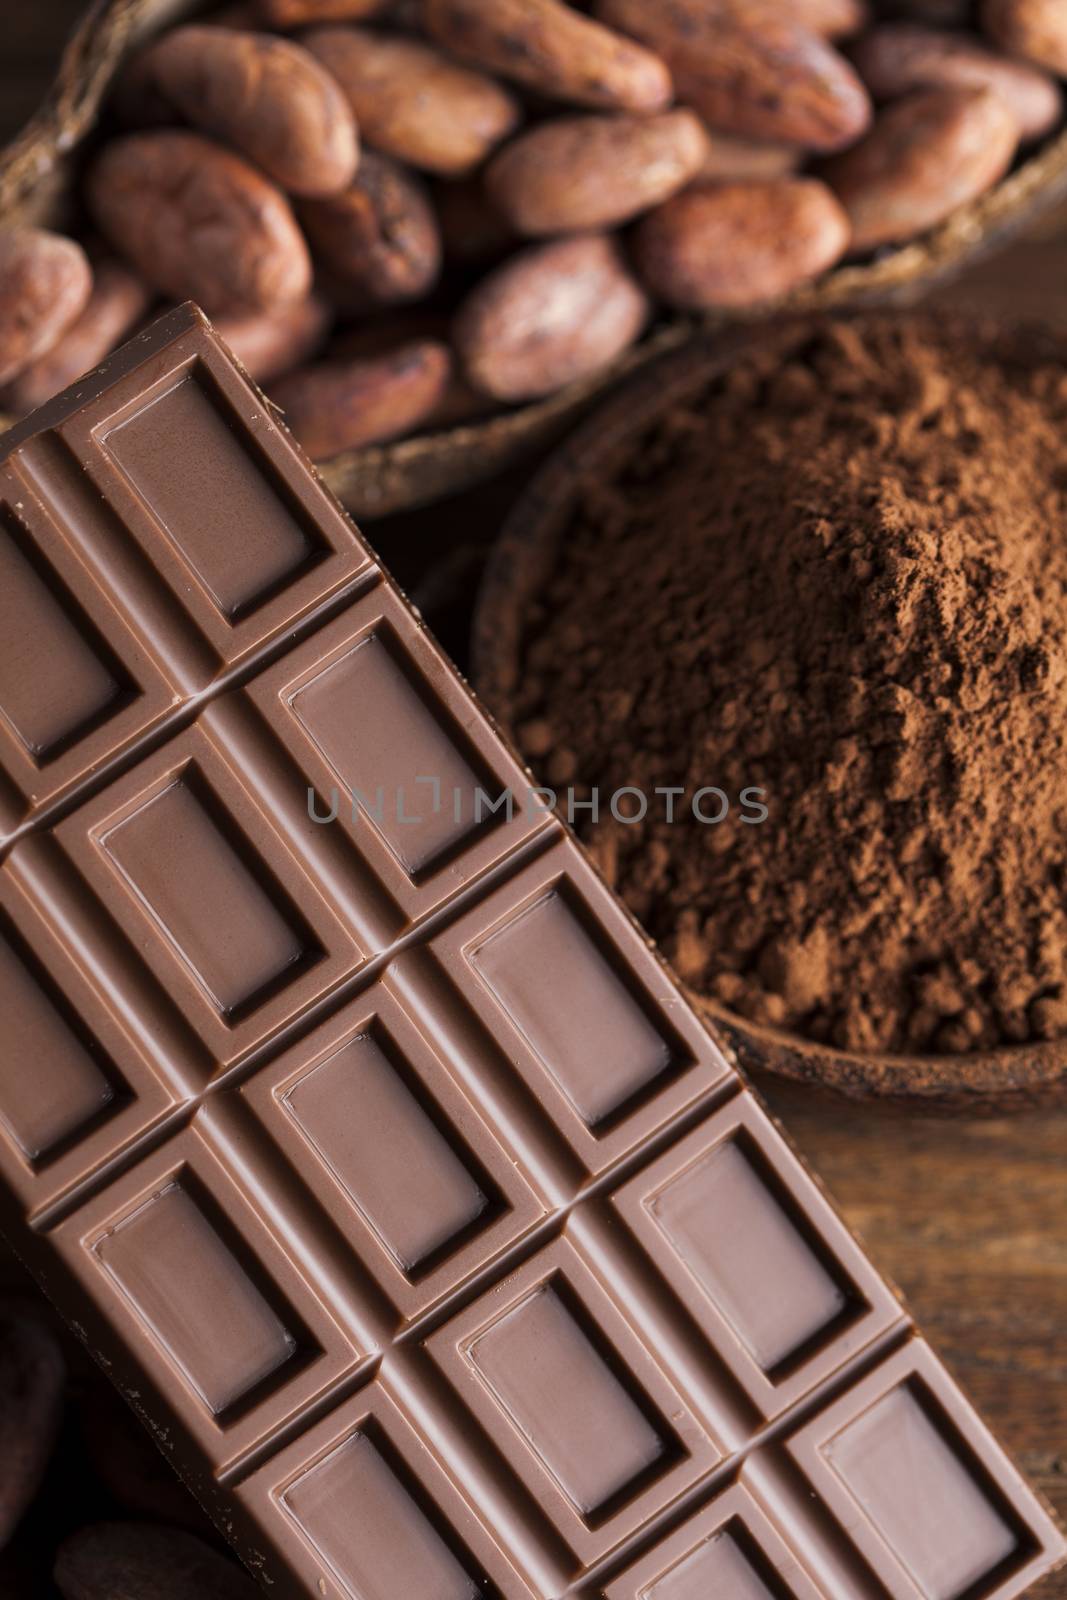 Chocolate bar, candy sweet, cacao beans and powder on wooden background